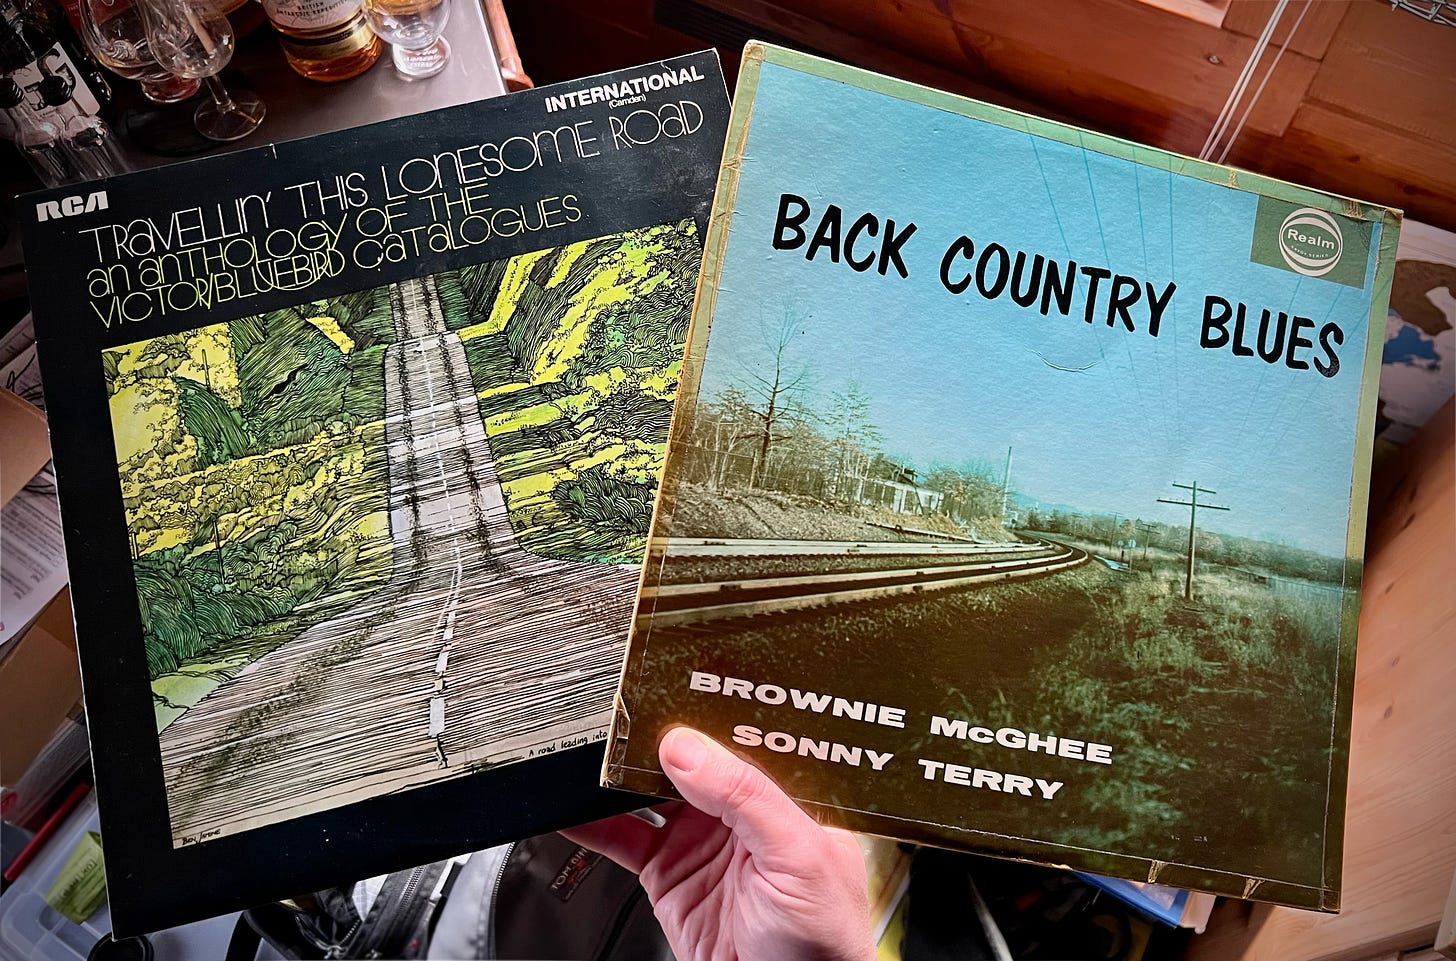 Two records. Travelling this lonesome road and The Back Country Blues.